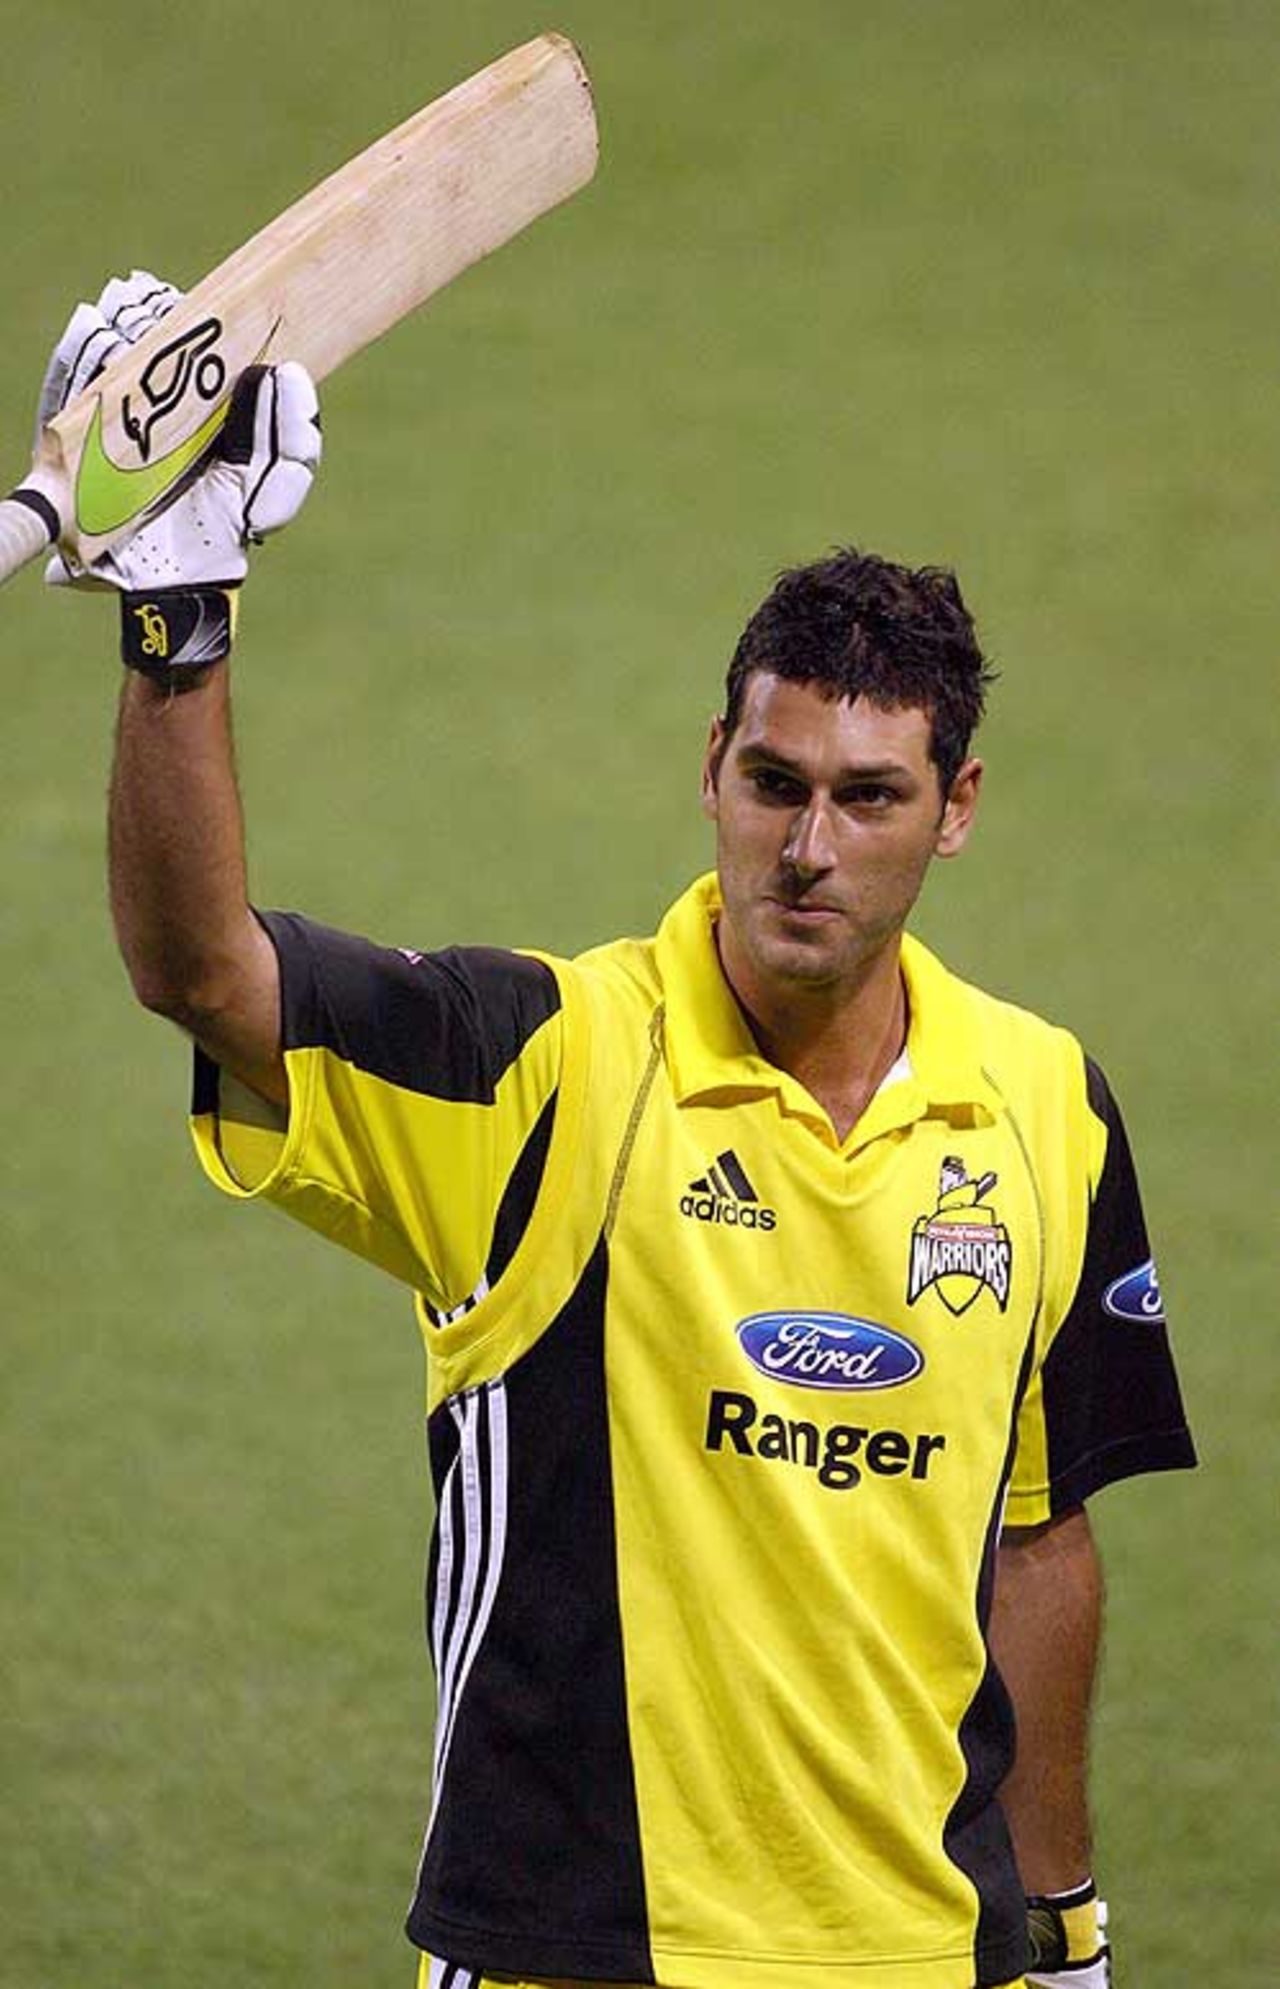 Theo Doropoulos' 92 helped Western Australia to victory, Western Australia v Tasmania, Ford Ranger Cup, Perth, October 24, 2008